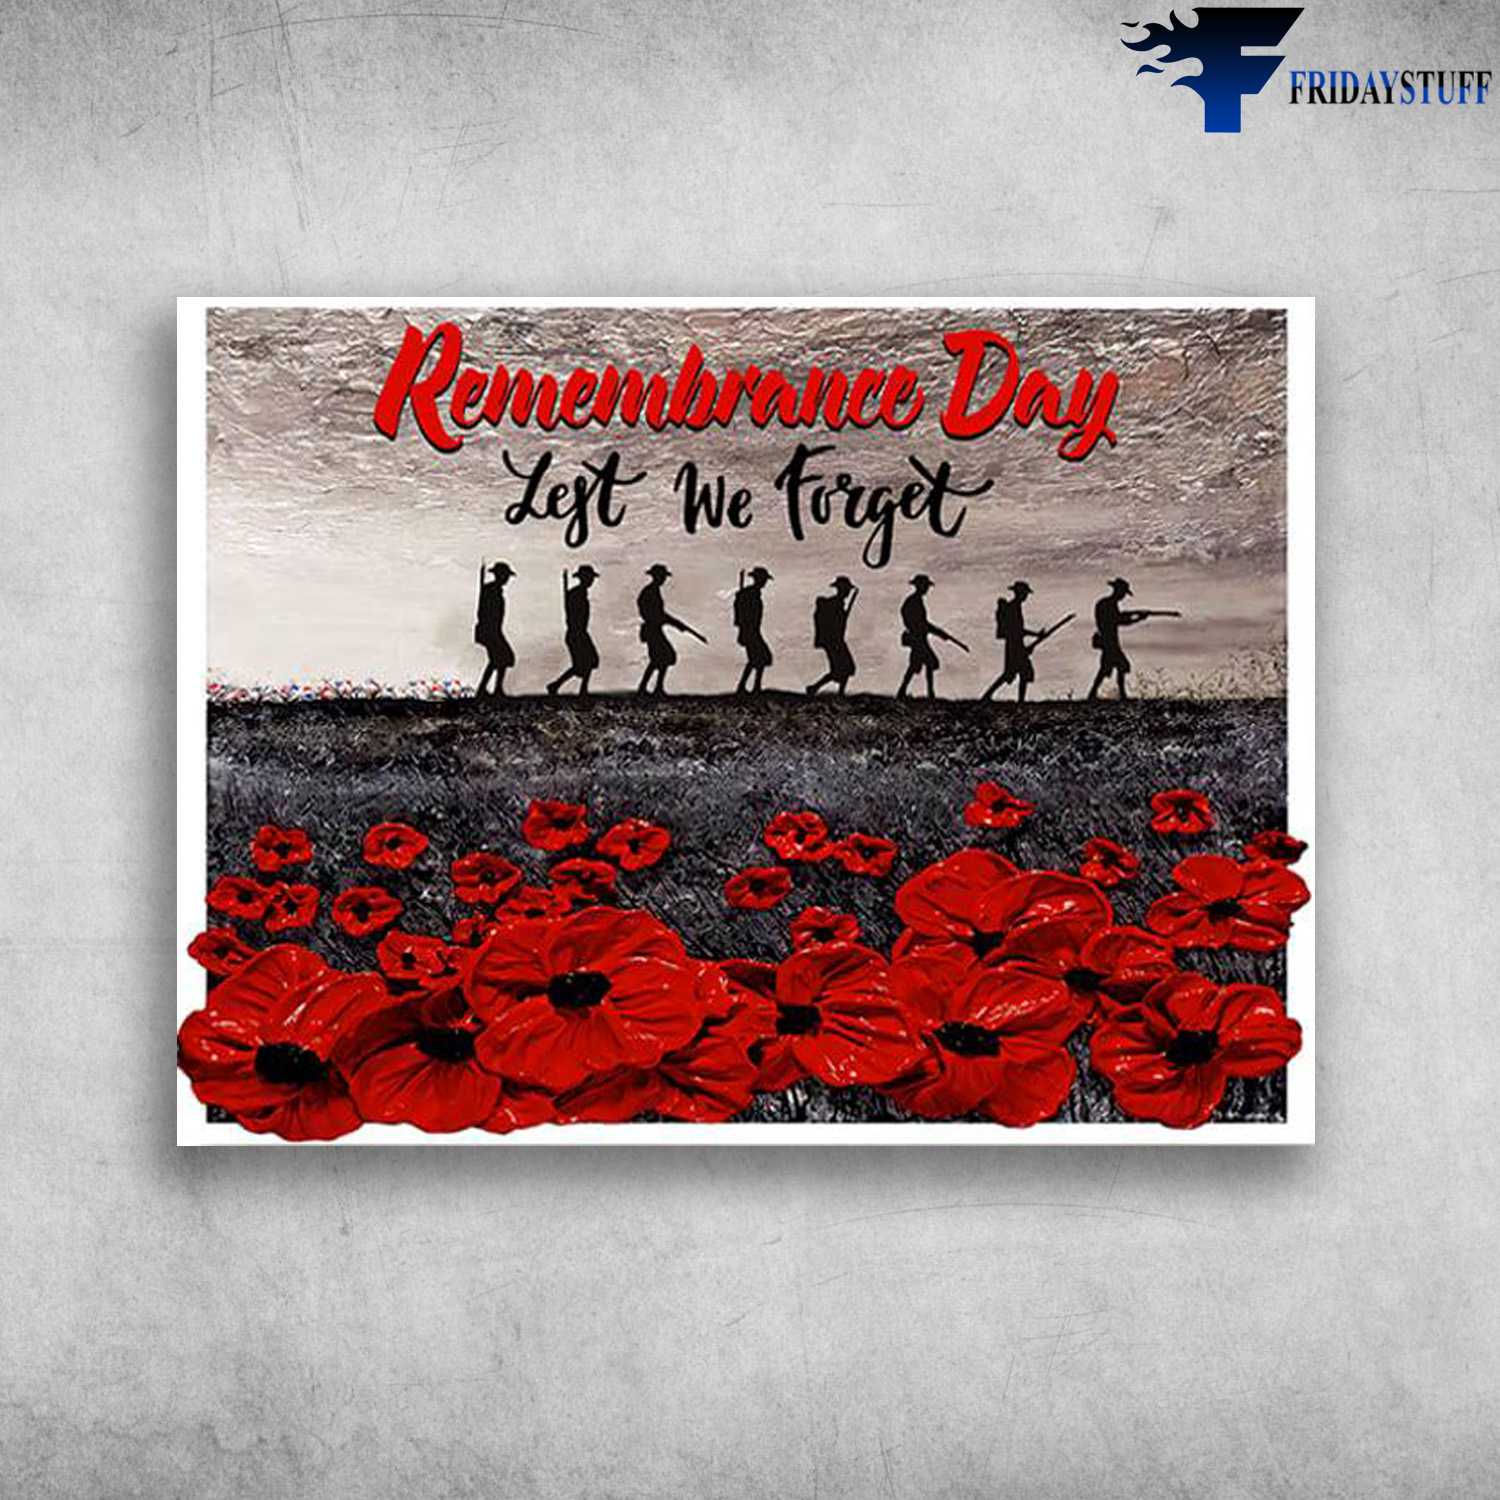 Soldiers Marching, War Poster - Remembrance Day, Left Me Forget